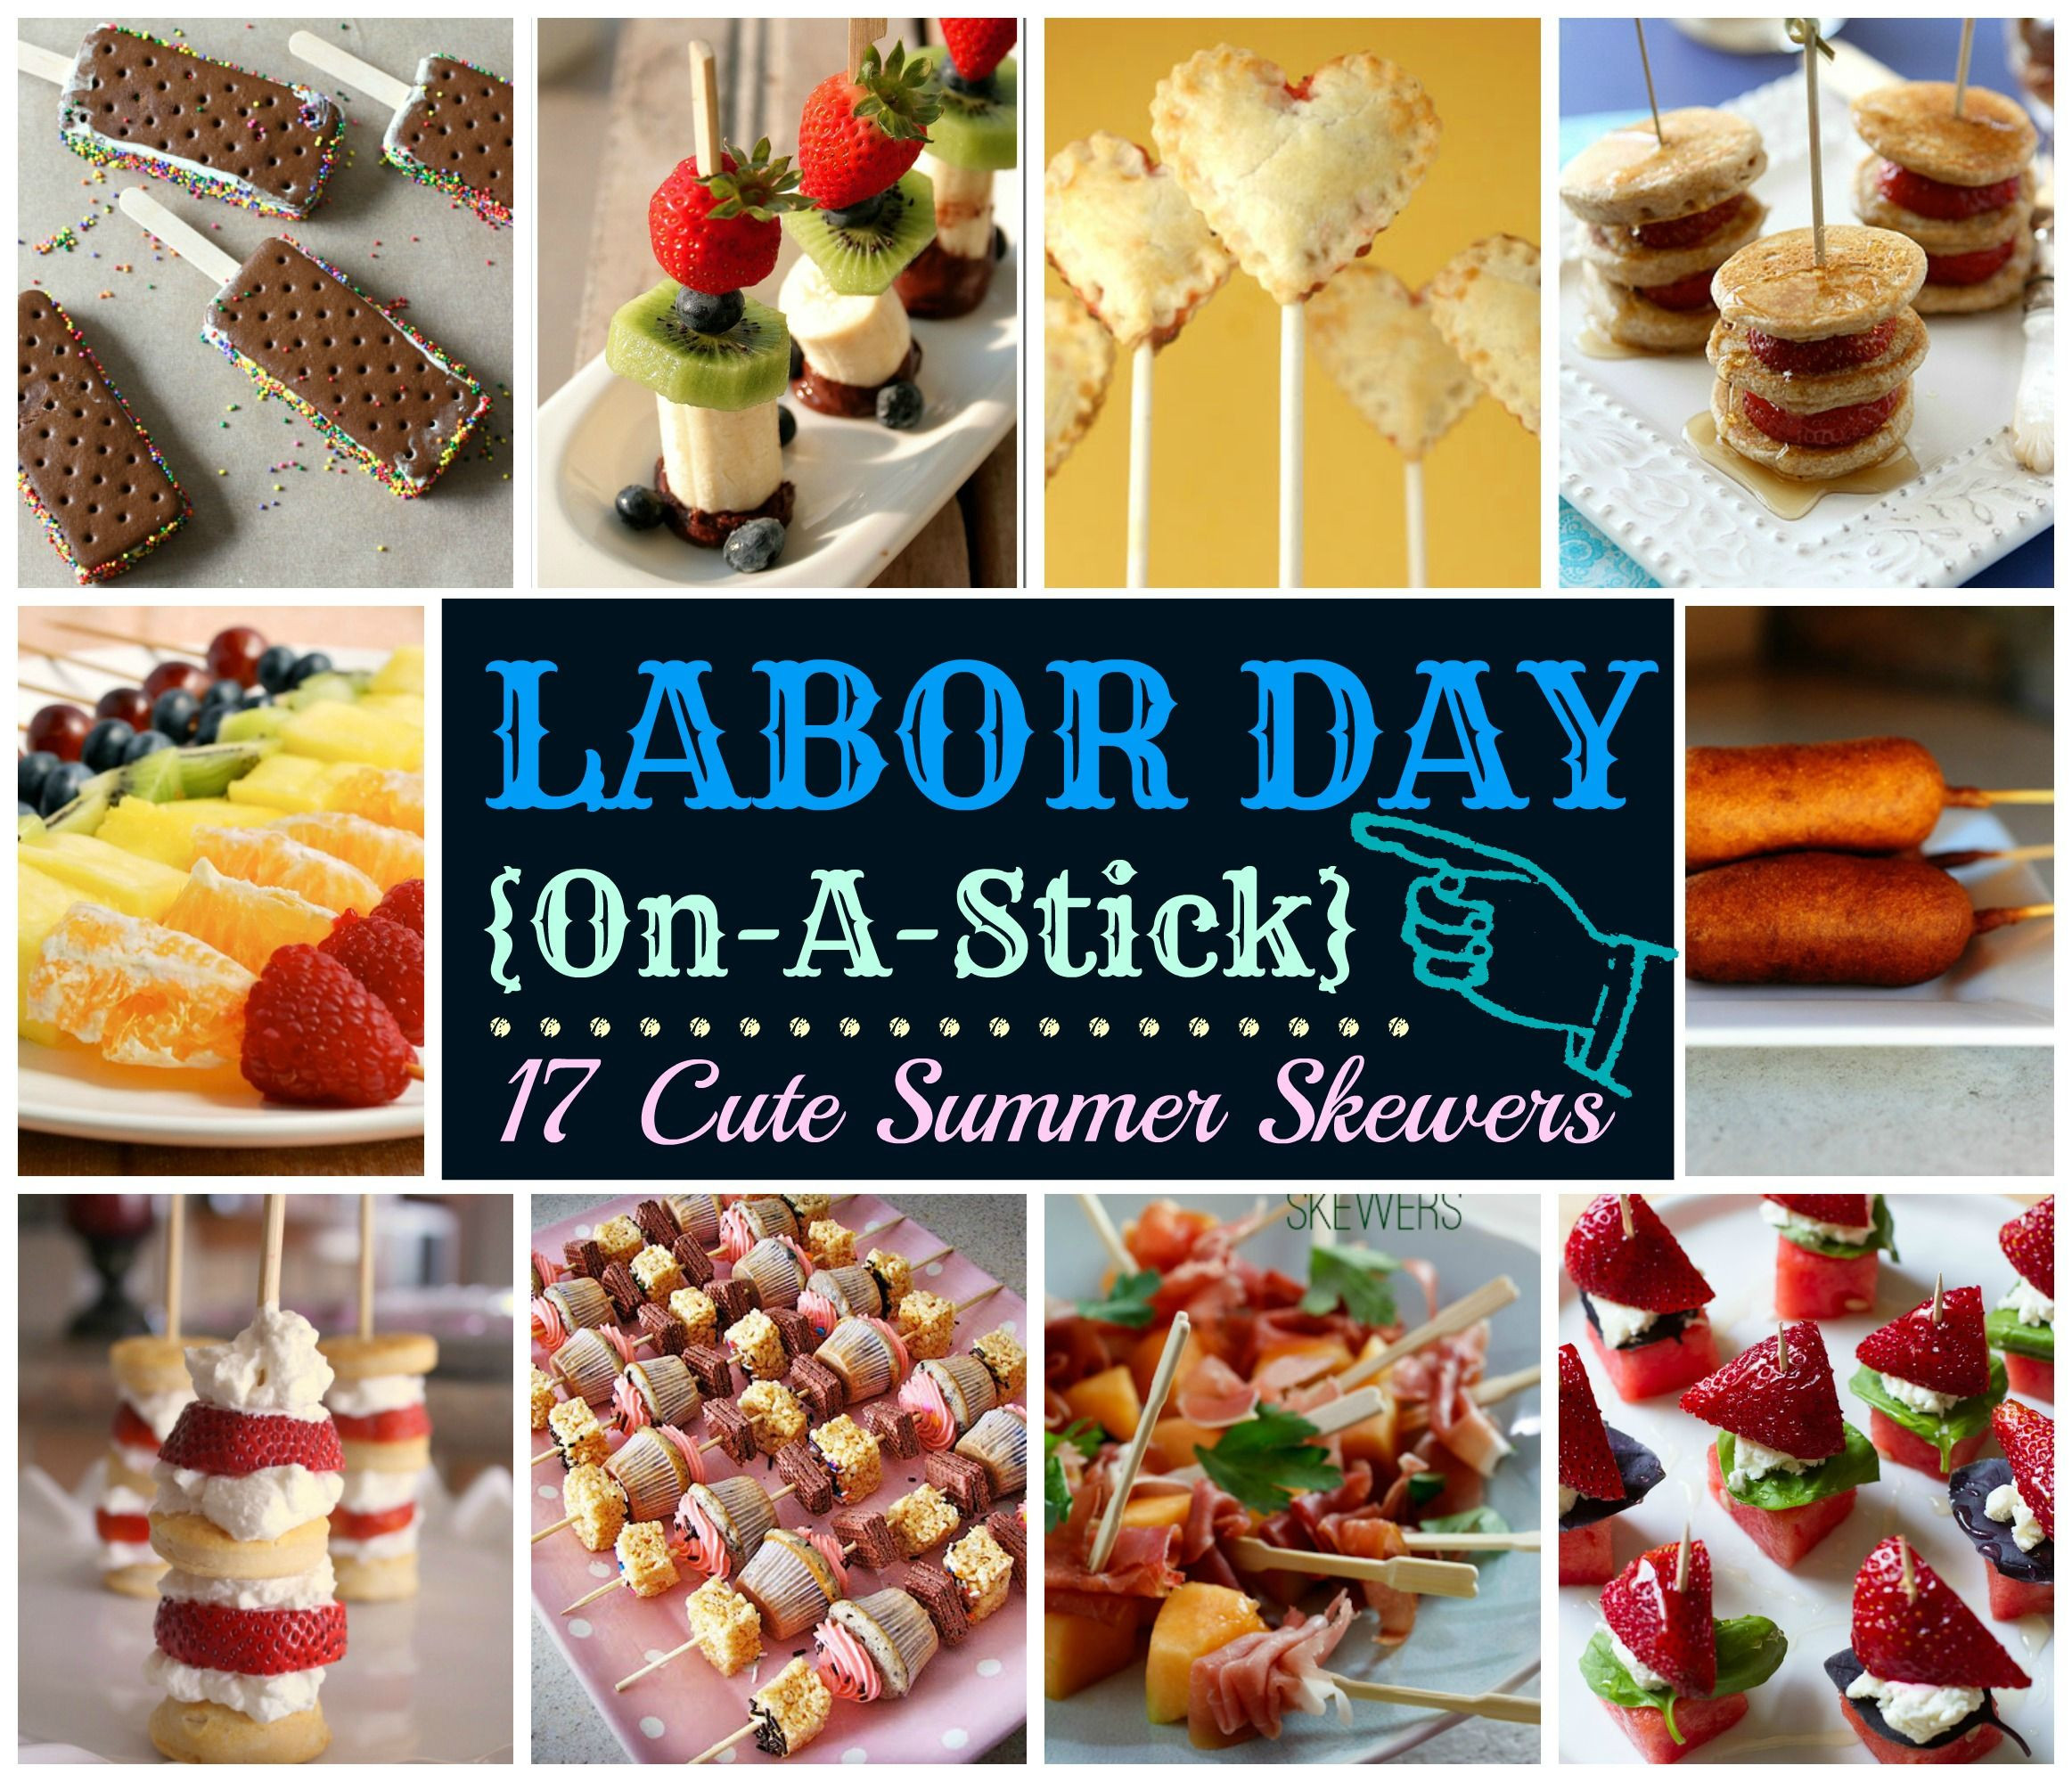 Labor Day Picnic Ideas
 Labor Day A Stick 17 Cute Summer Skewers